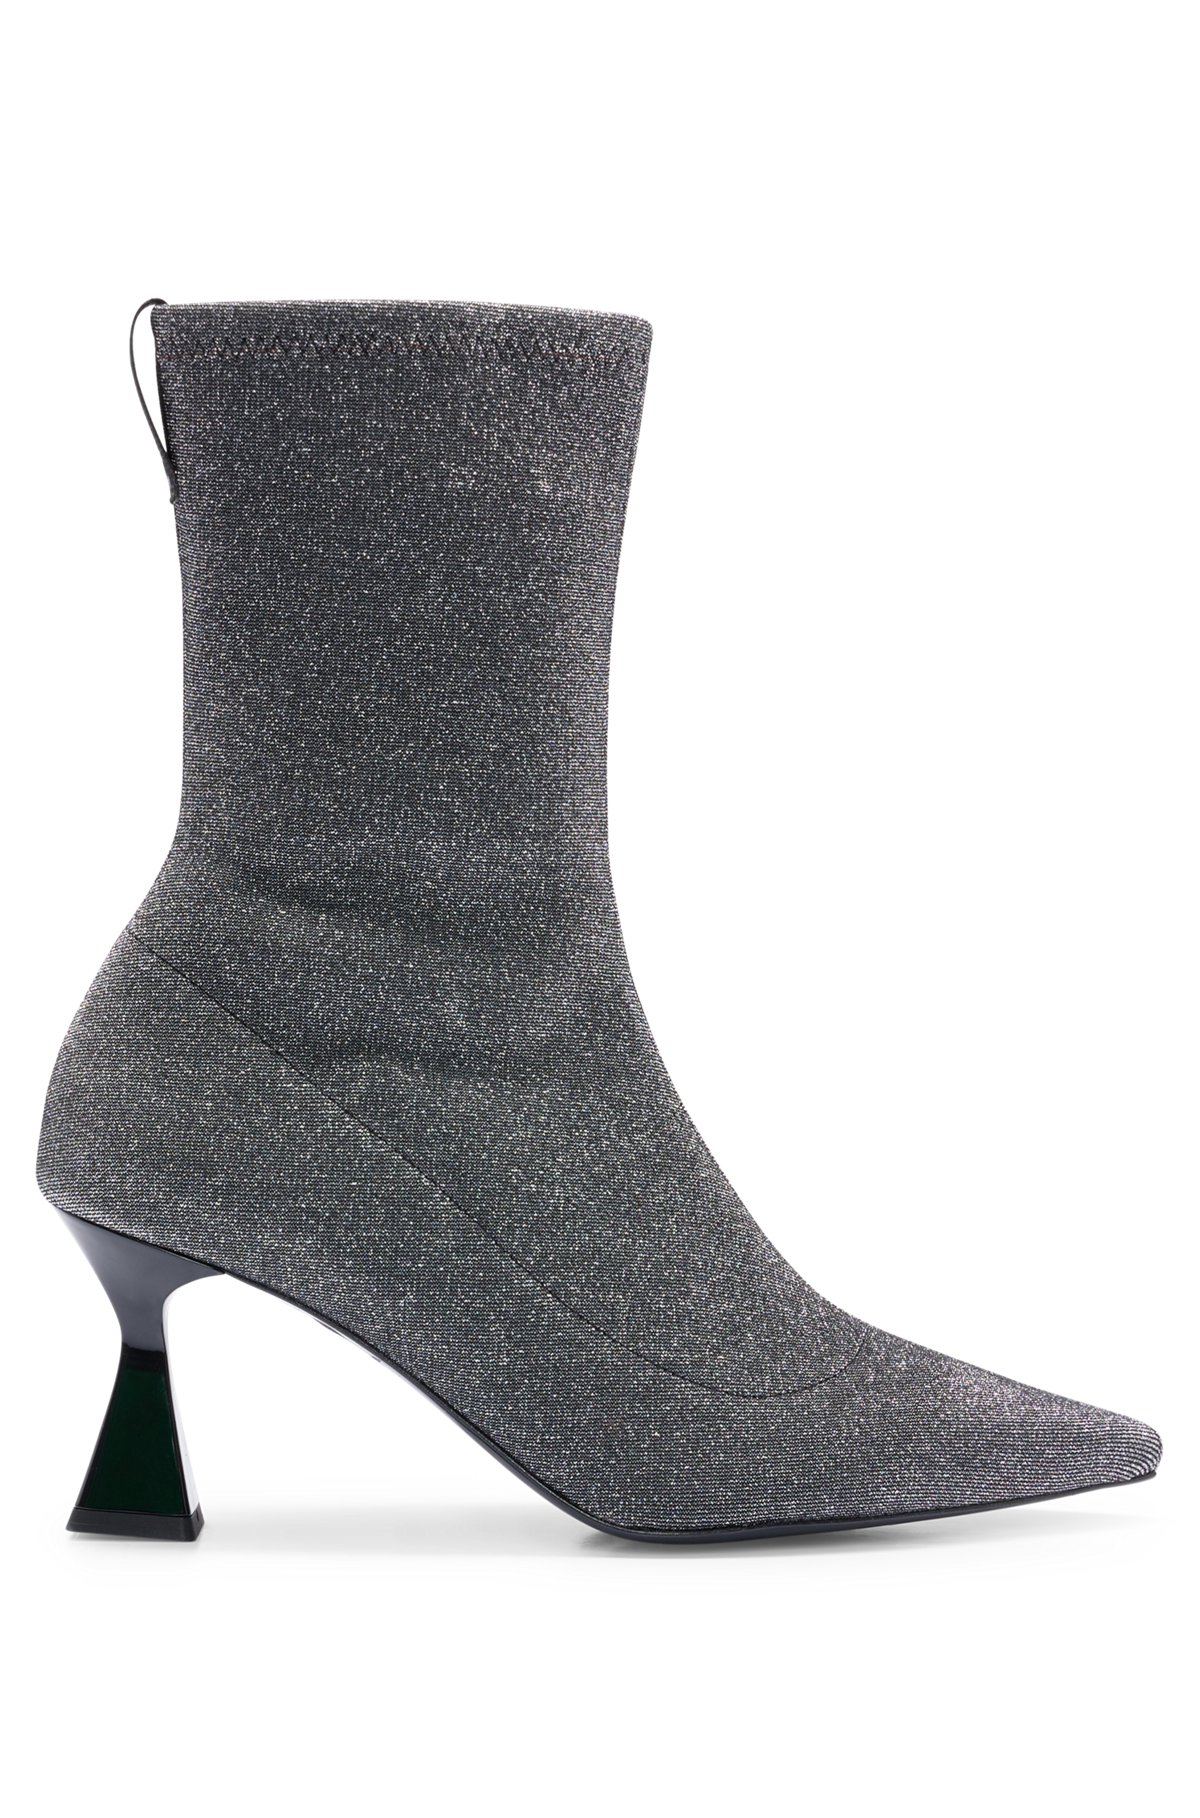 HUGO - Zipped ankle boots in sparkly fabric with feature heel